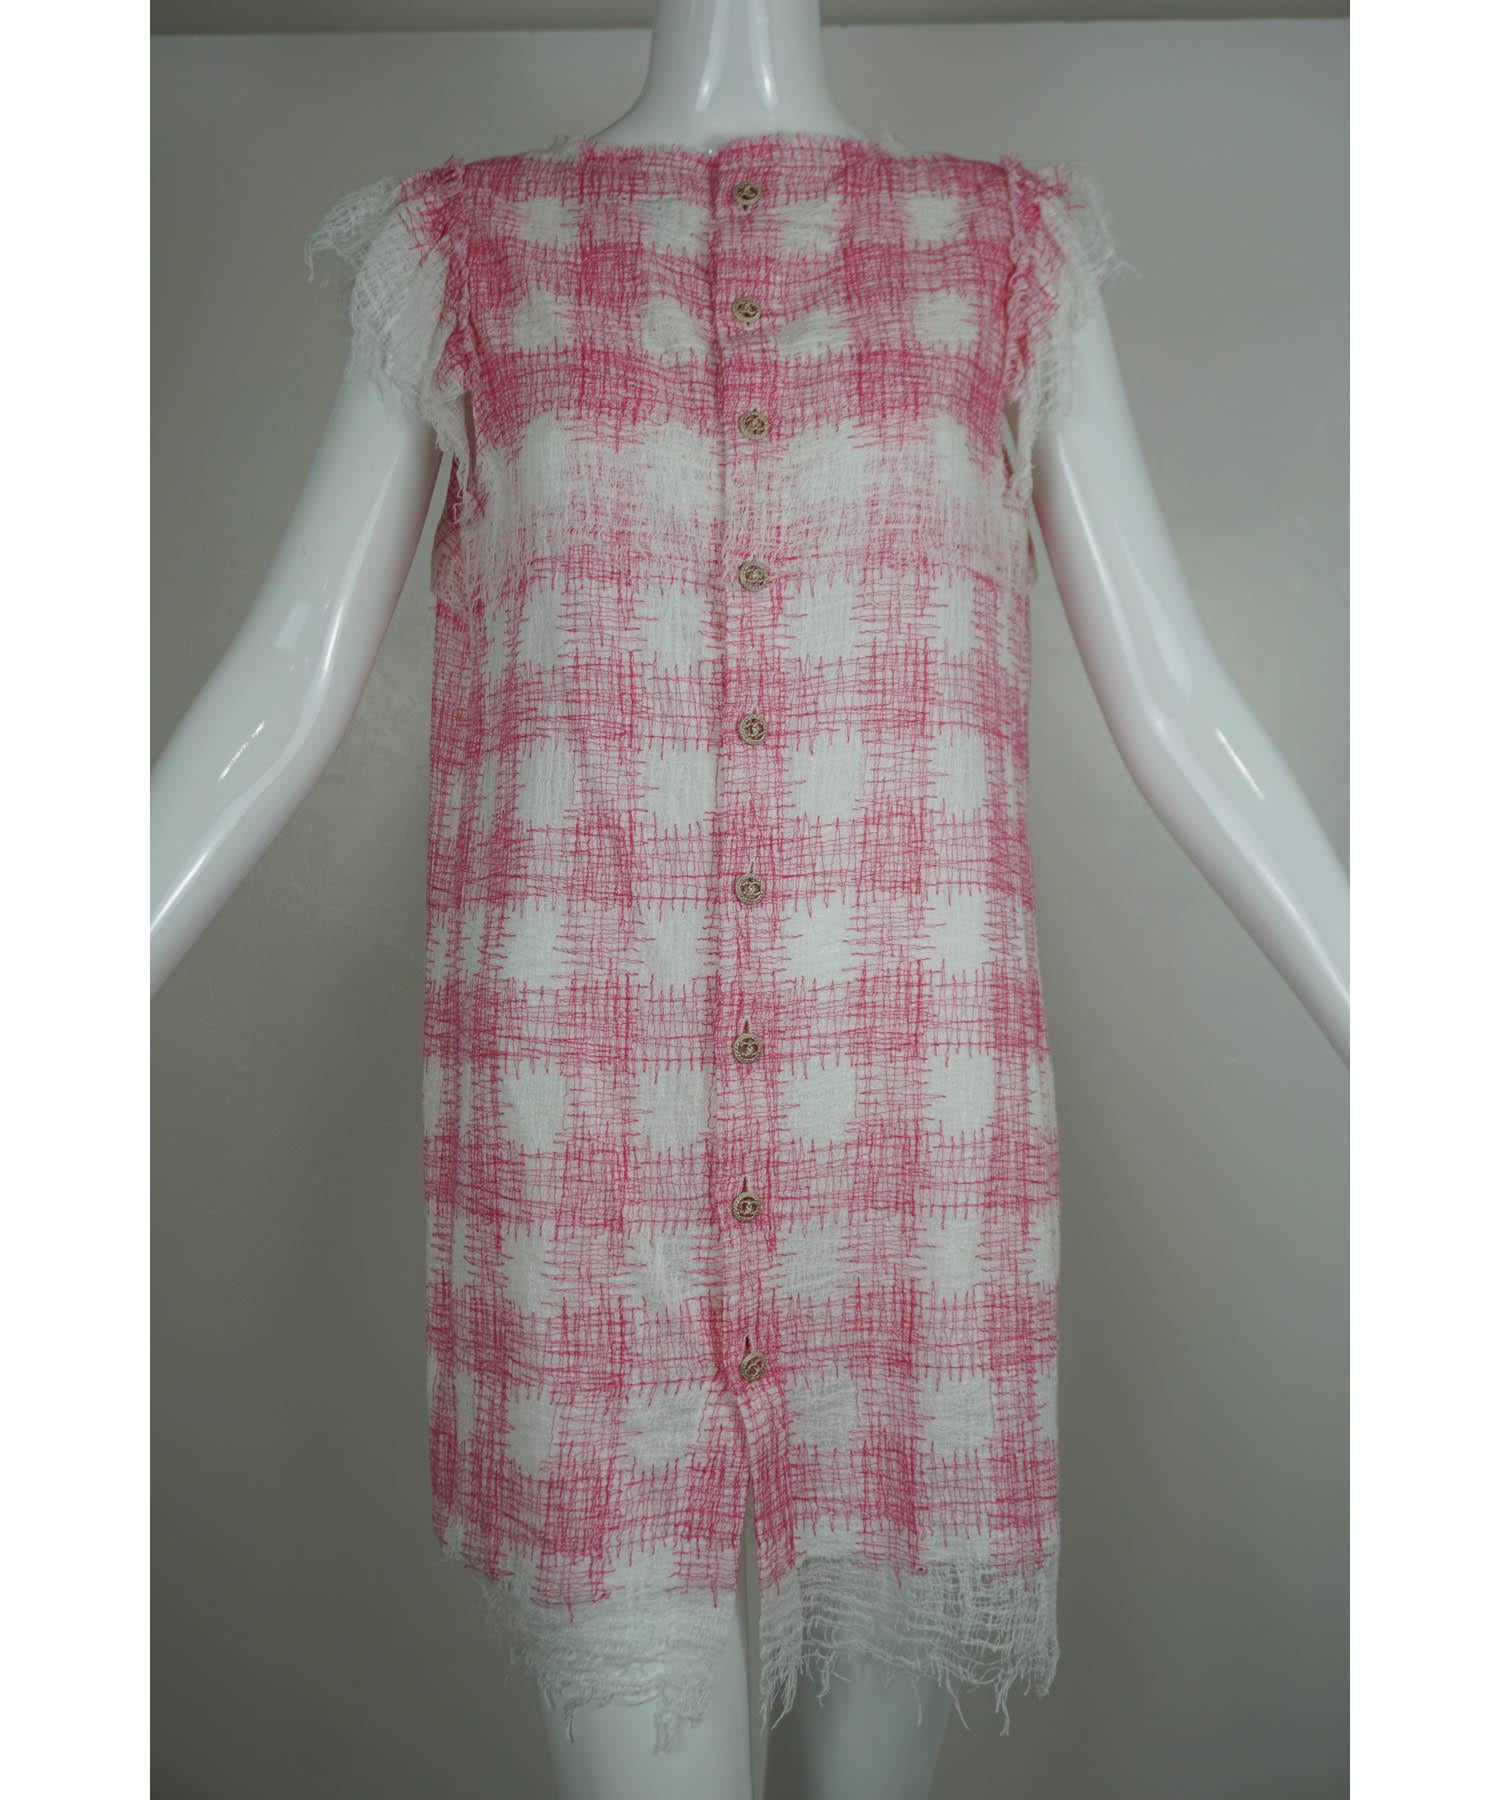 Chanel Gingham Tweed Sheath Dress 42/10 2011 In Excellent Condition For Sale In Carmel, CA